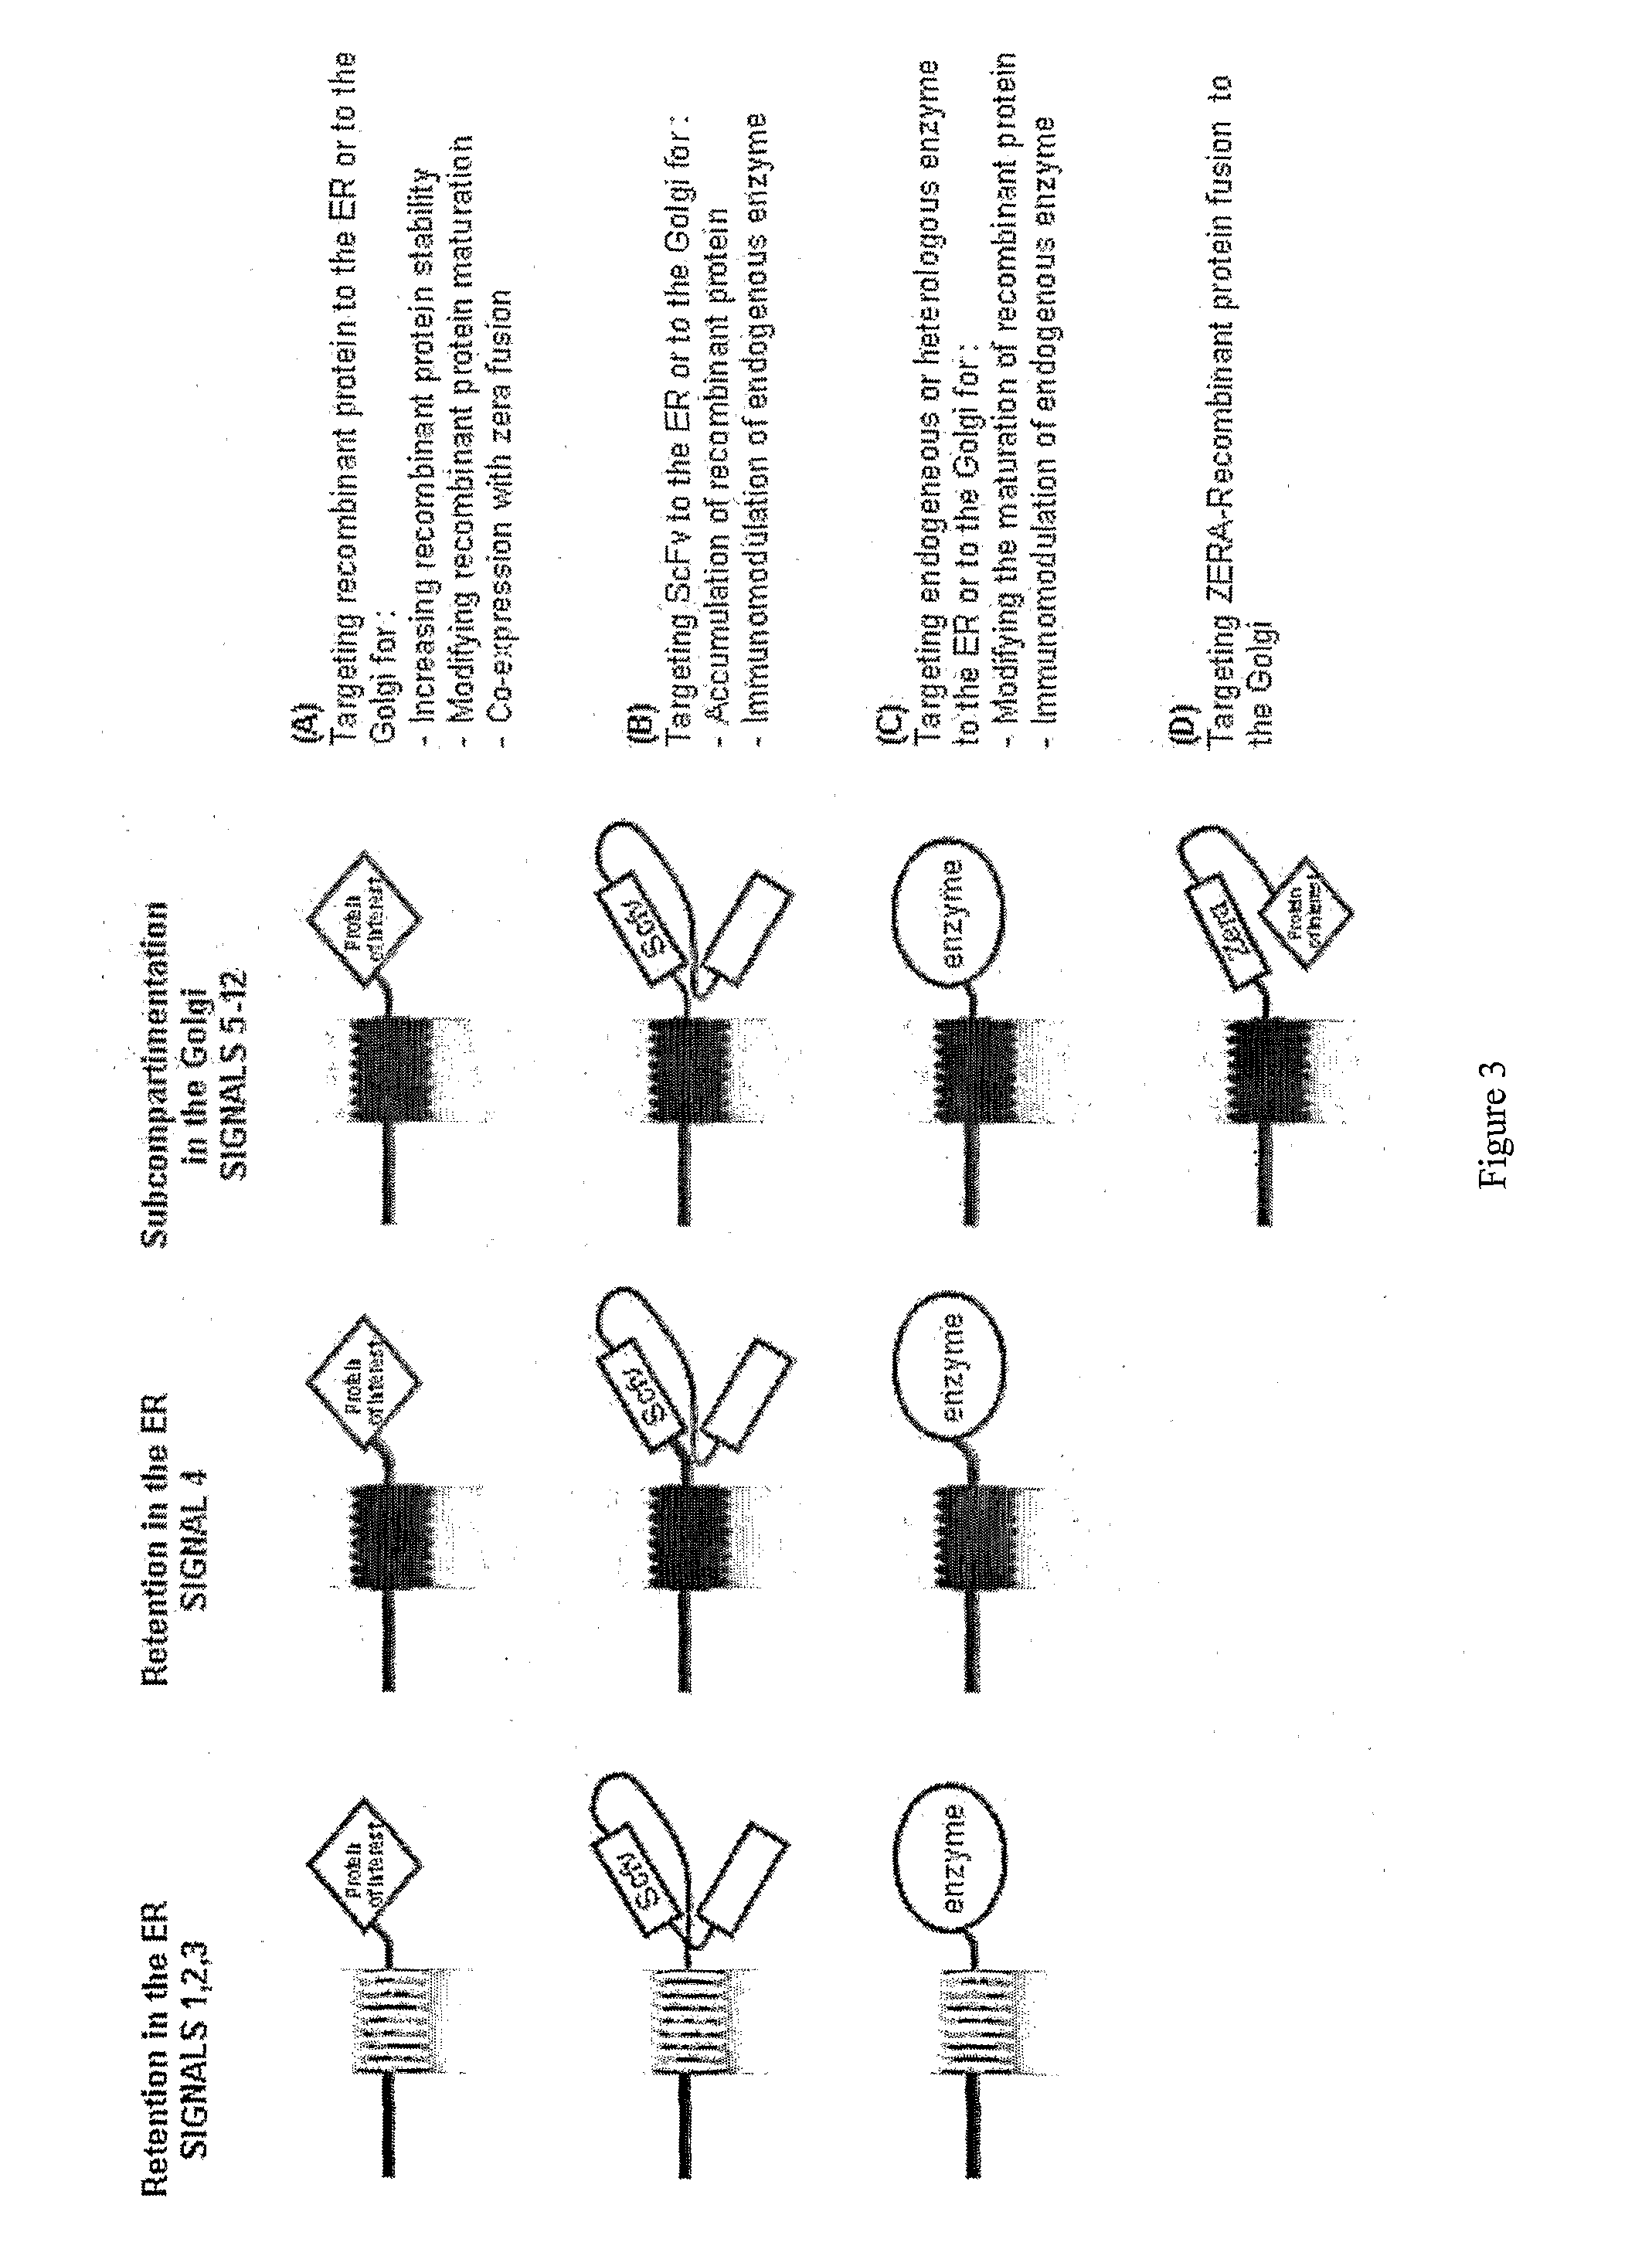 Set of sequences for targeting expression and control of the post-translational modification of a recombinant polypeptide